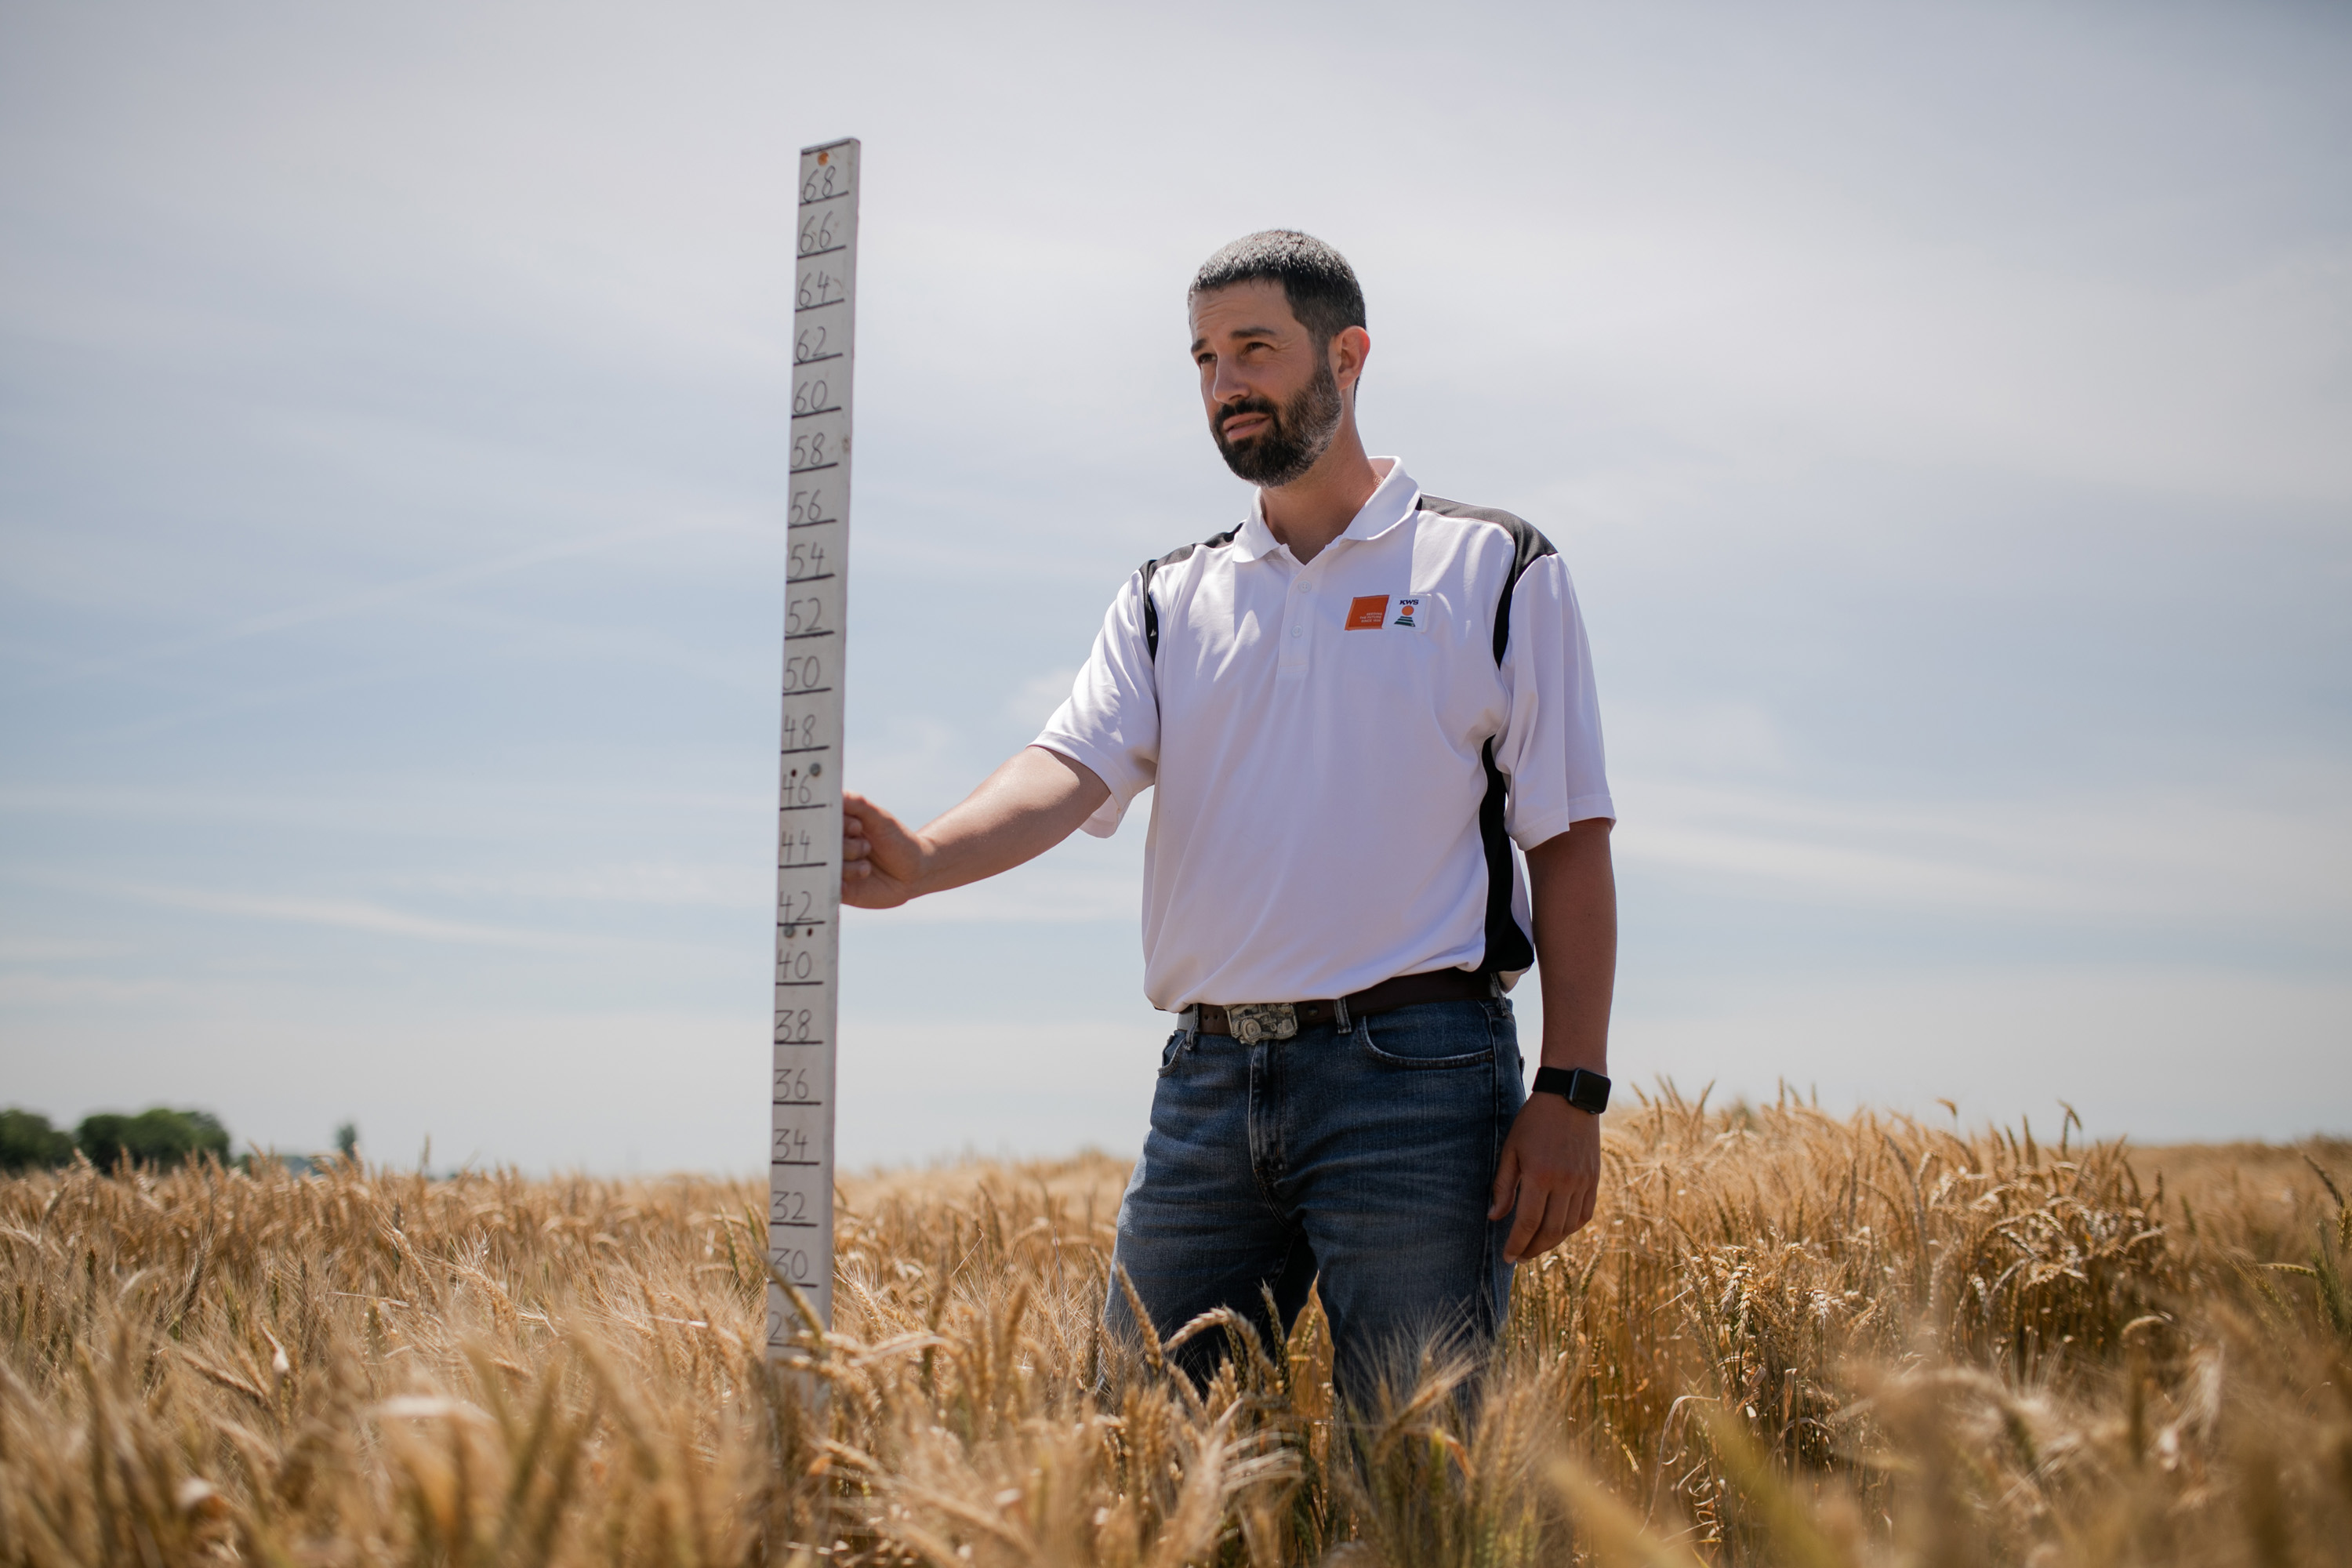 KWS wheat breeder Mark Christopher stands in a wheat field, carrying a large folding rule to determine the height of the plants.